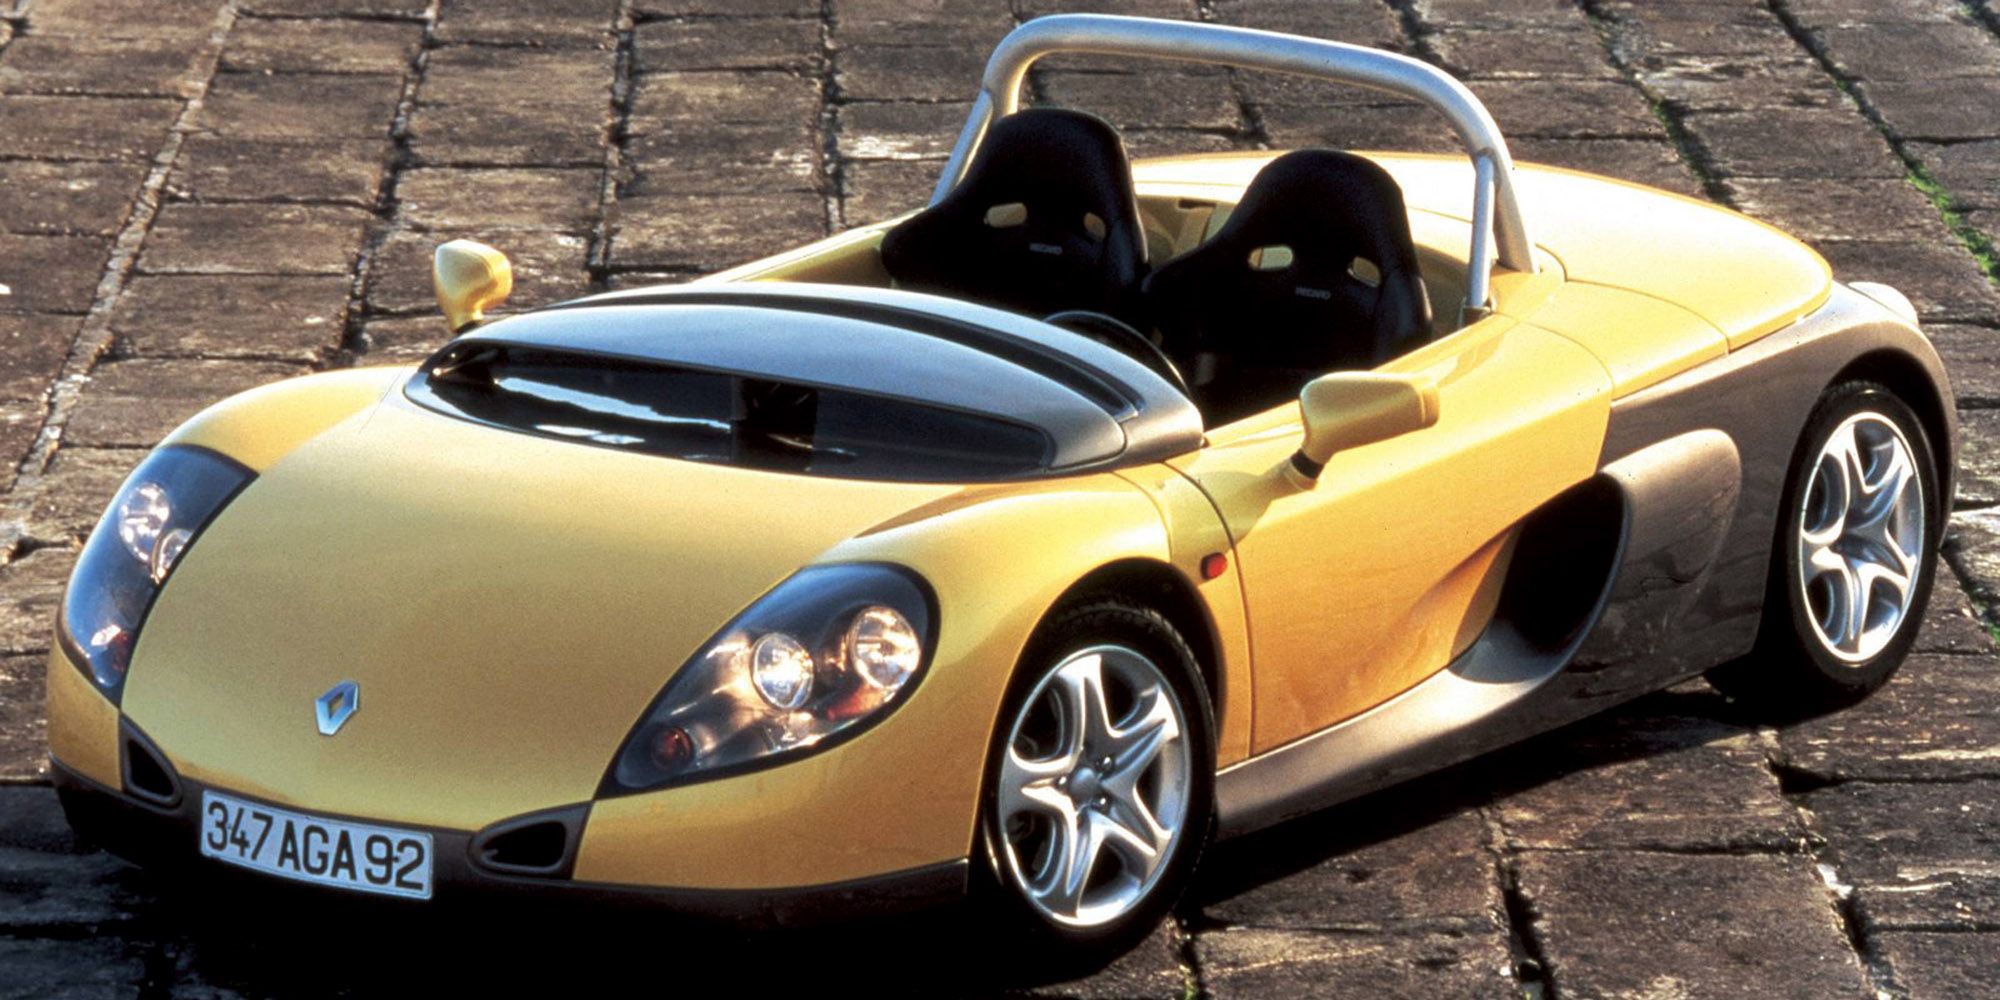 The Renault Sport Spider in a two-tone yellow and gray finish